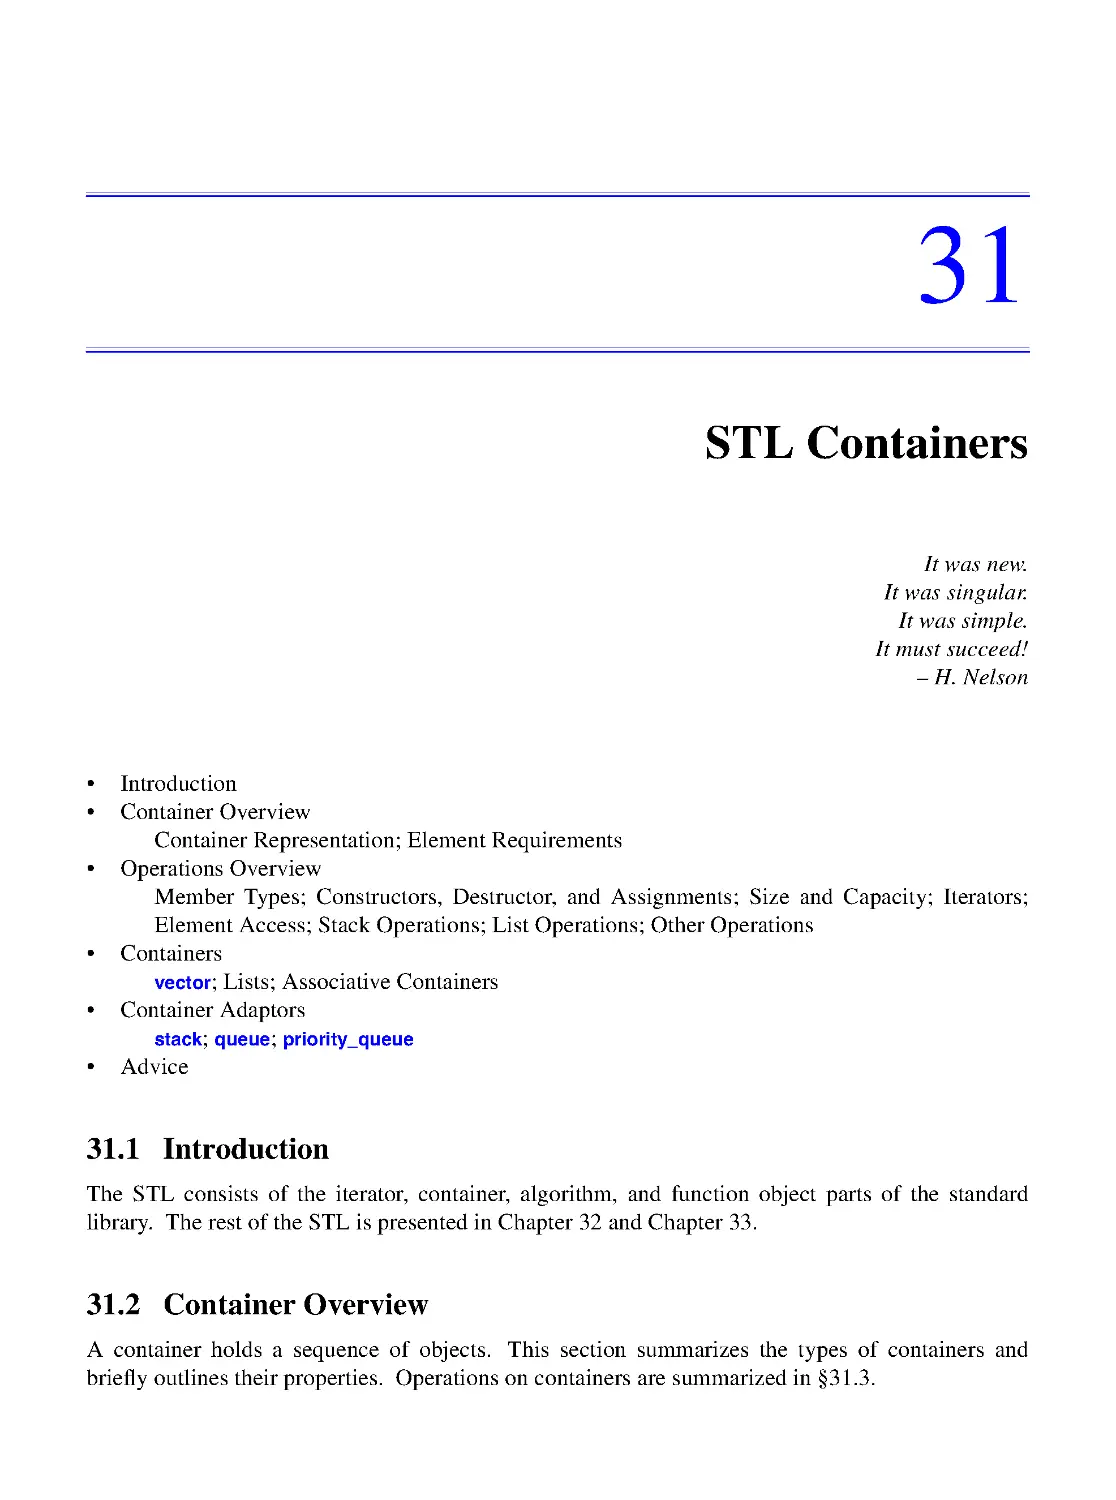 31. STL Containers